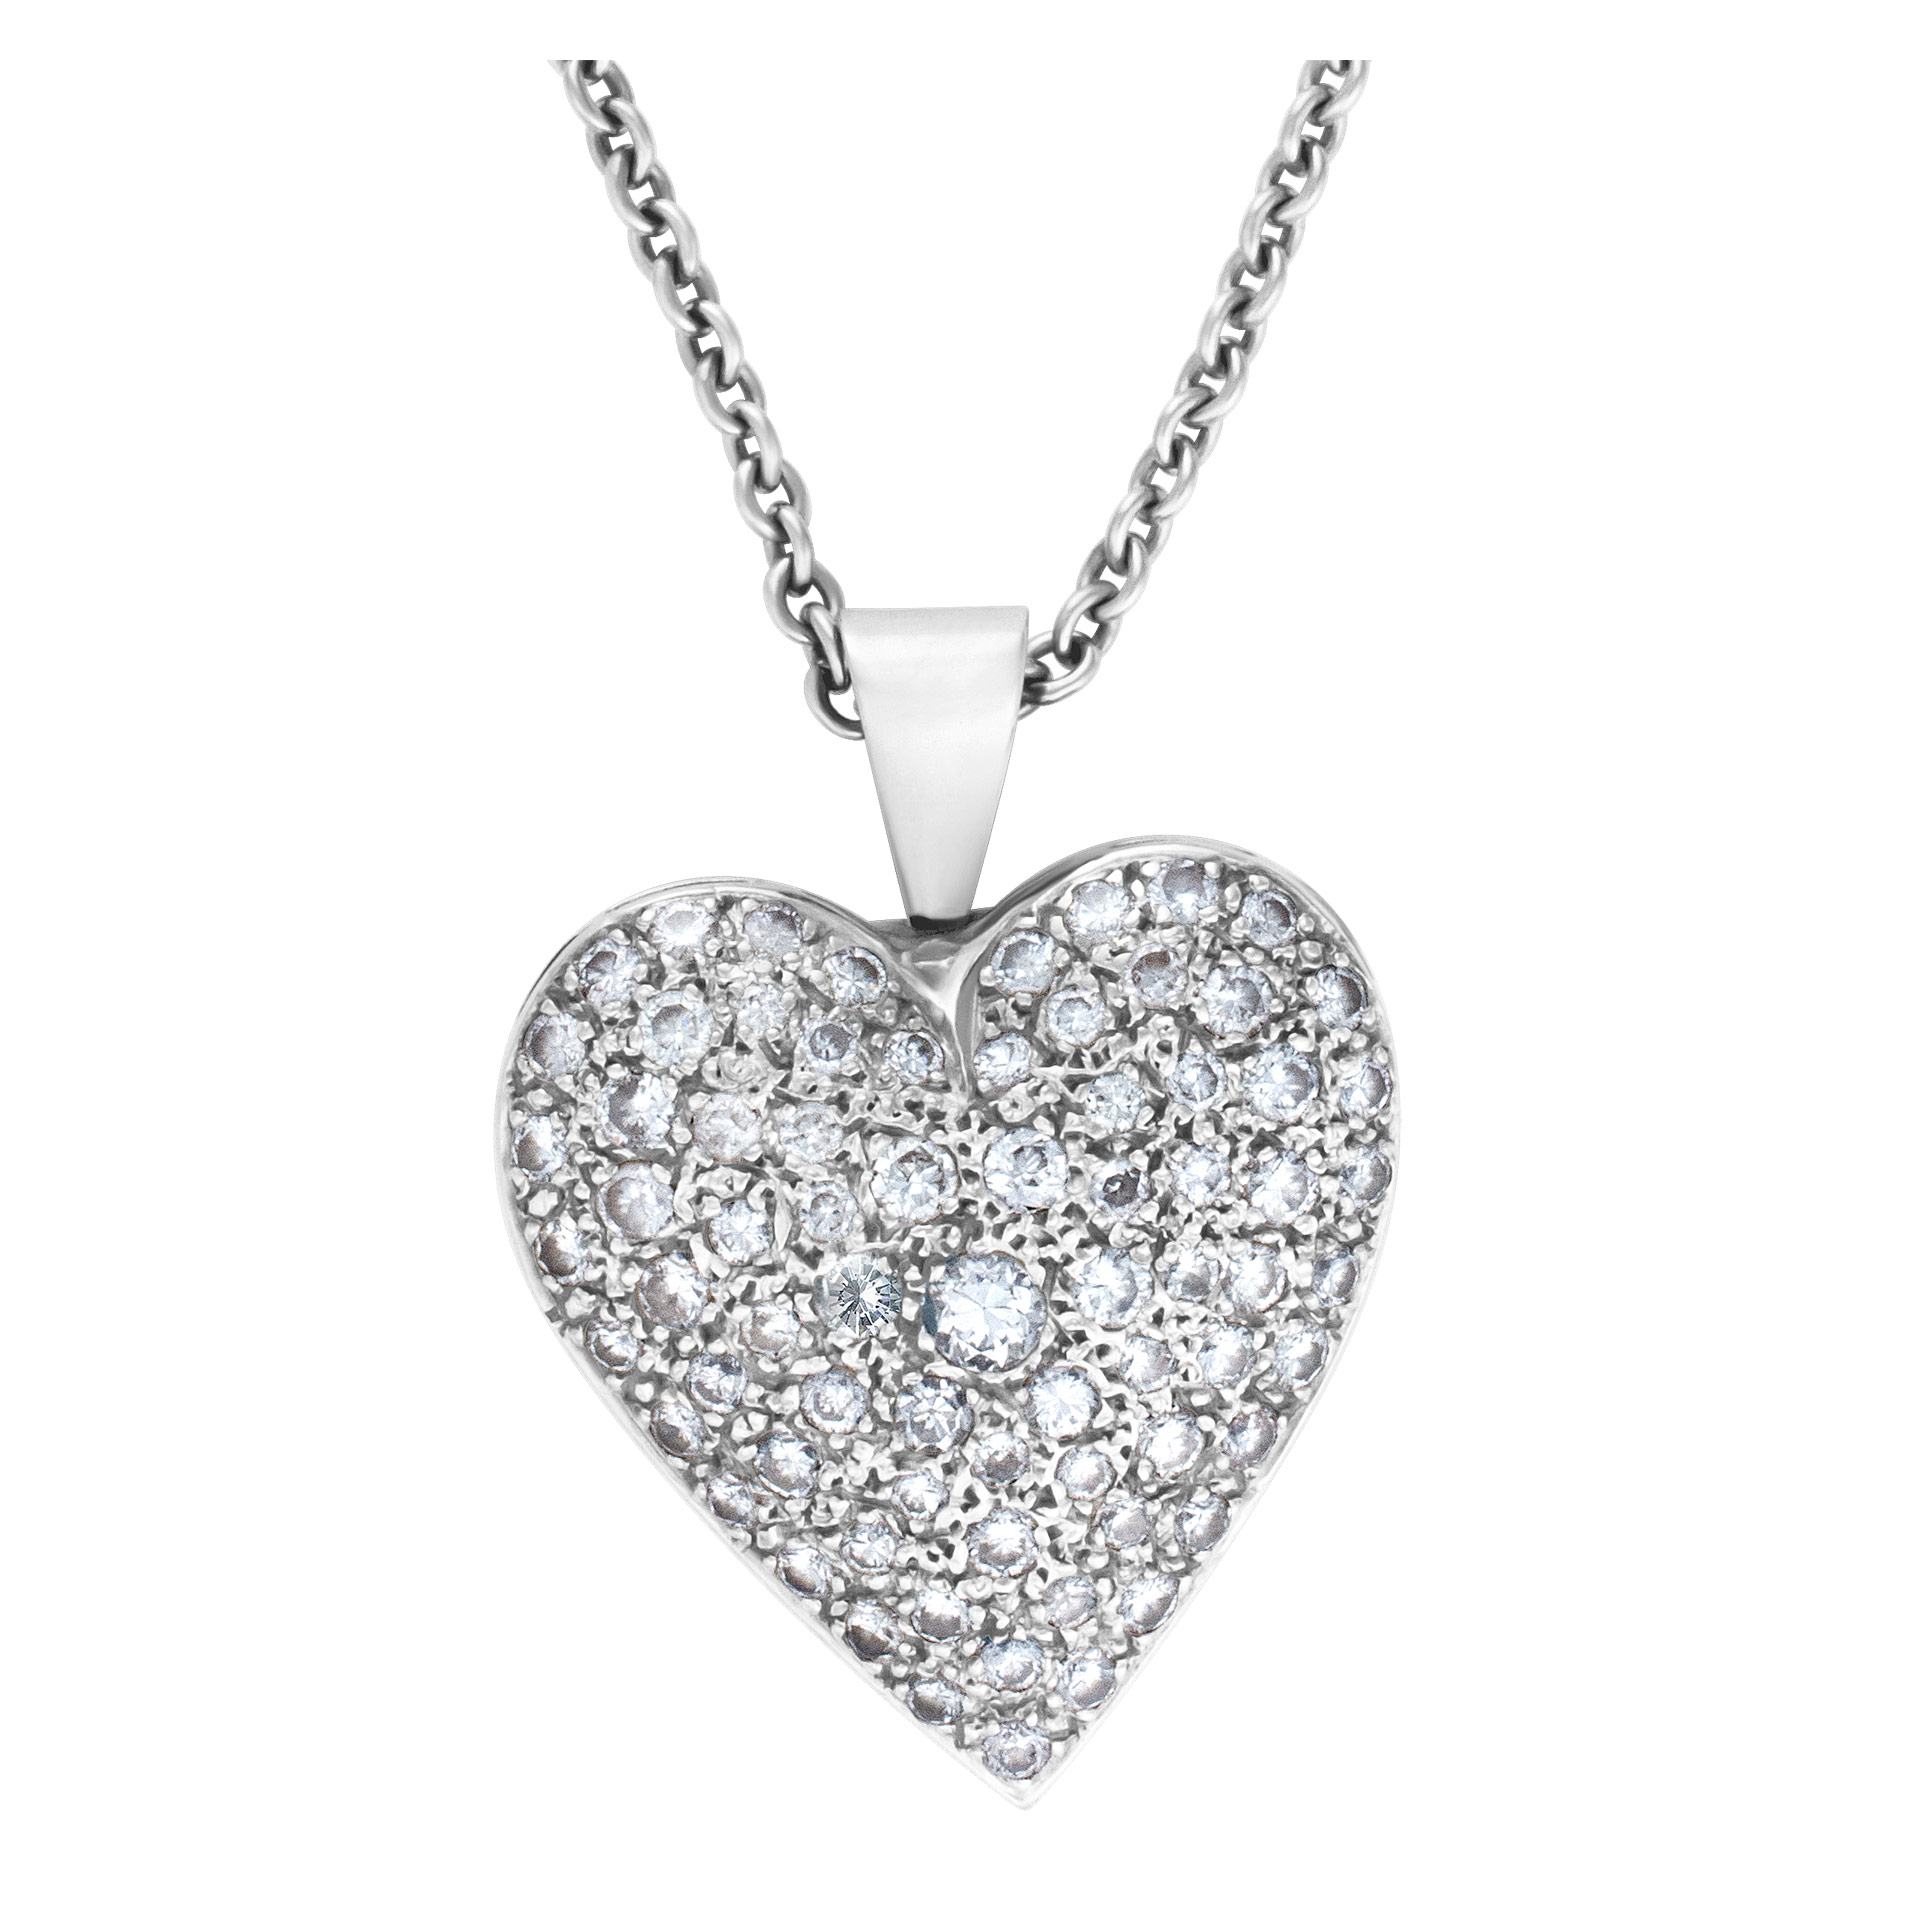 Pave diamond heart pendant and chain in 14k white gold. 4.50 carats image 1